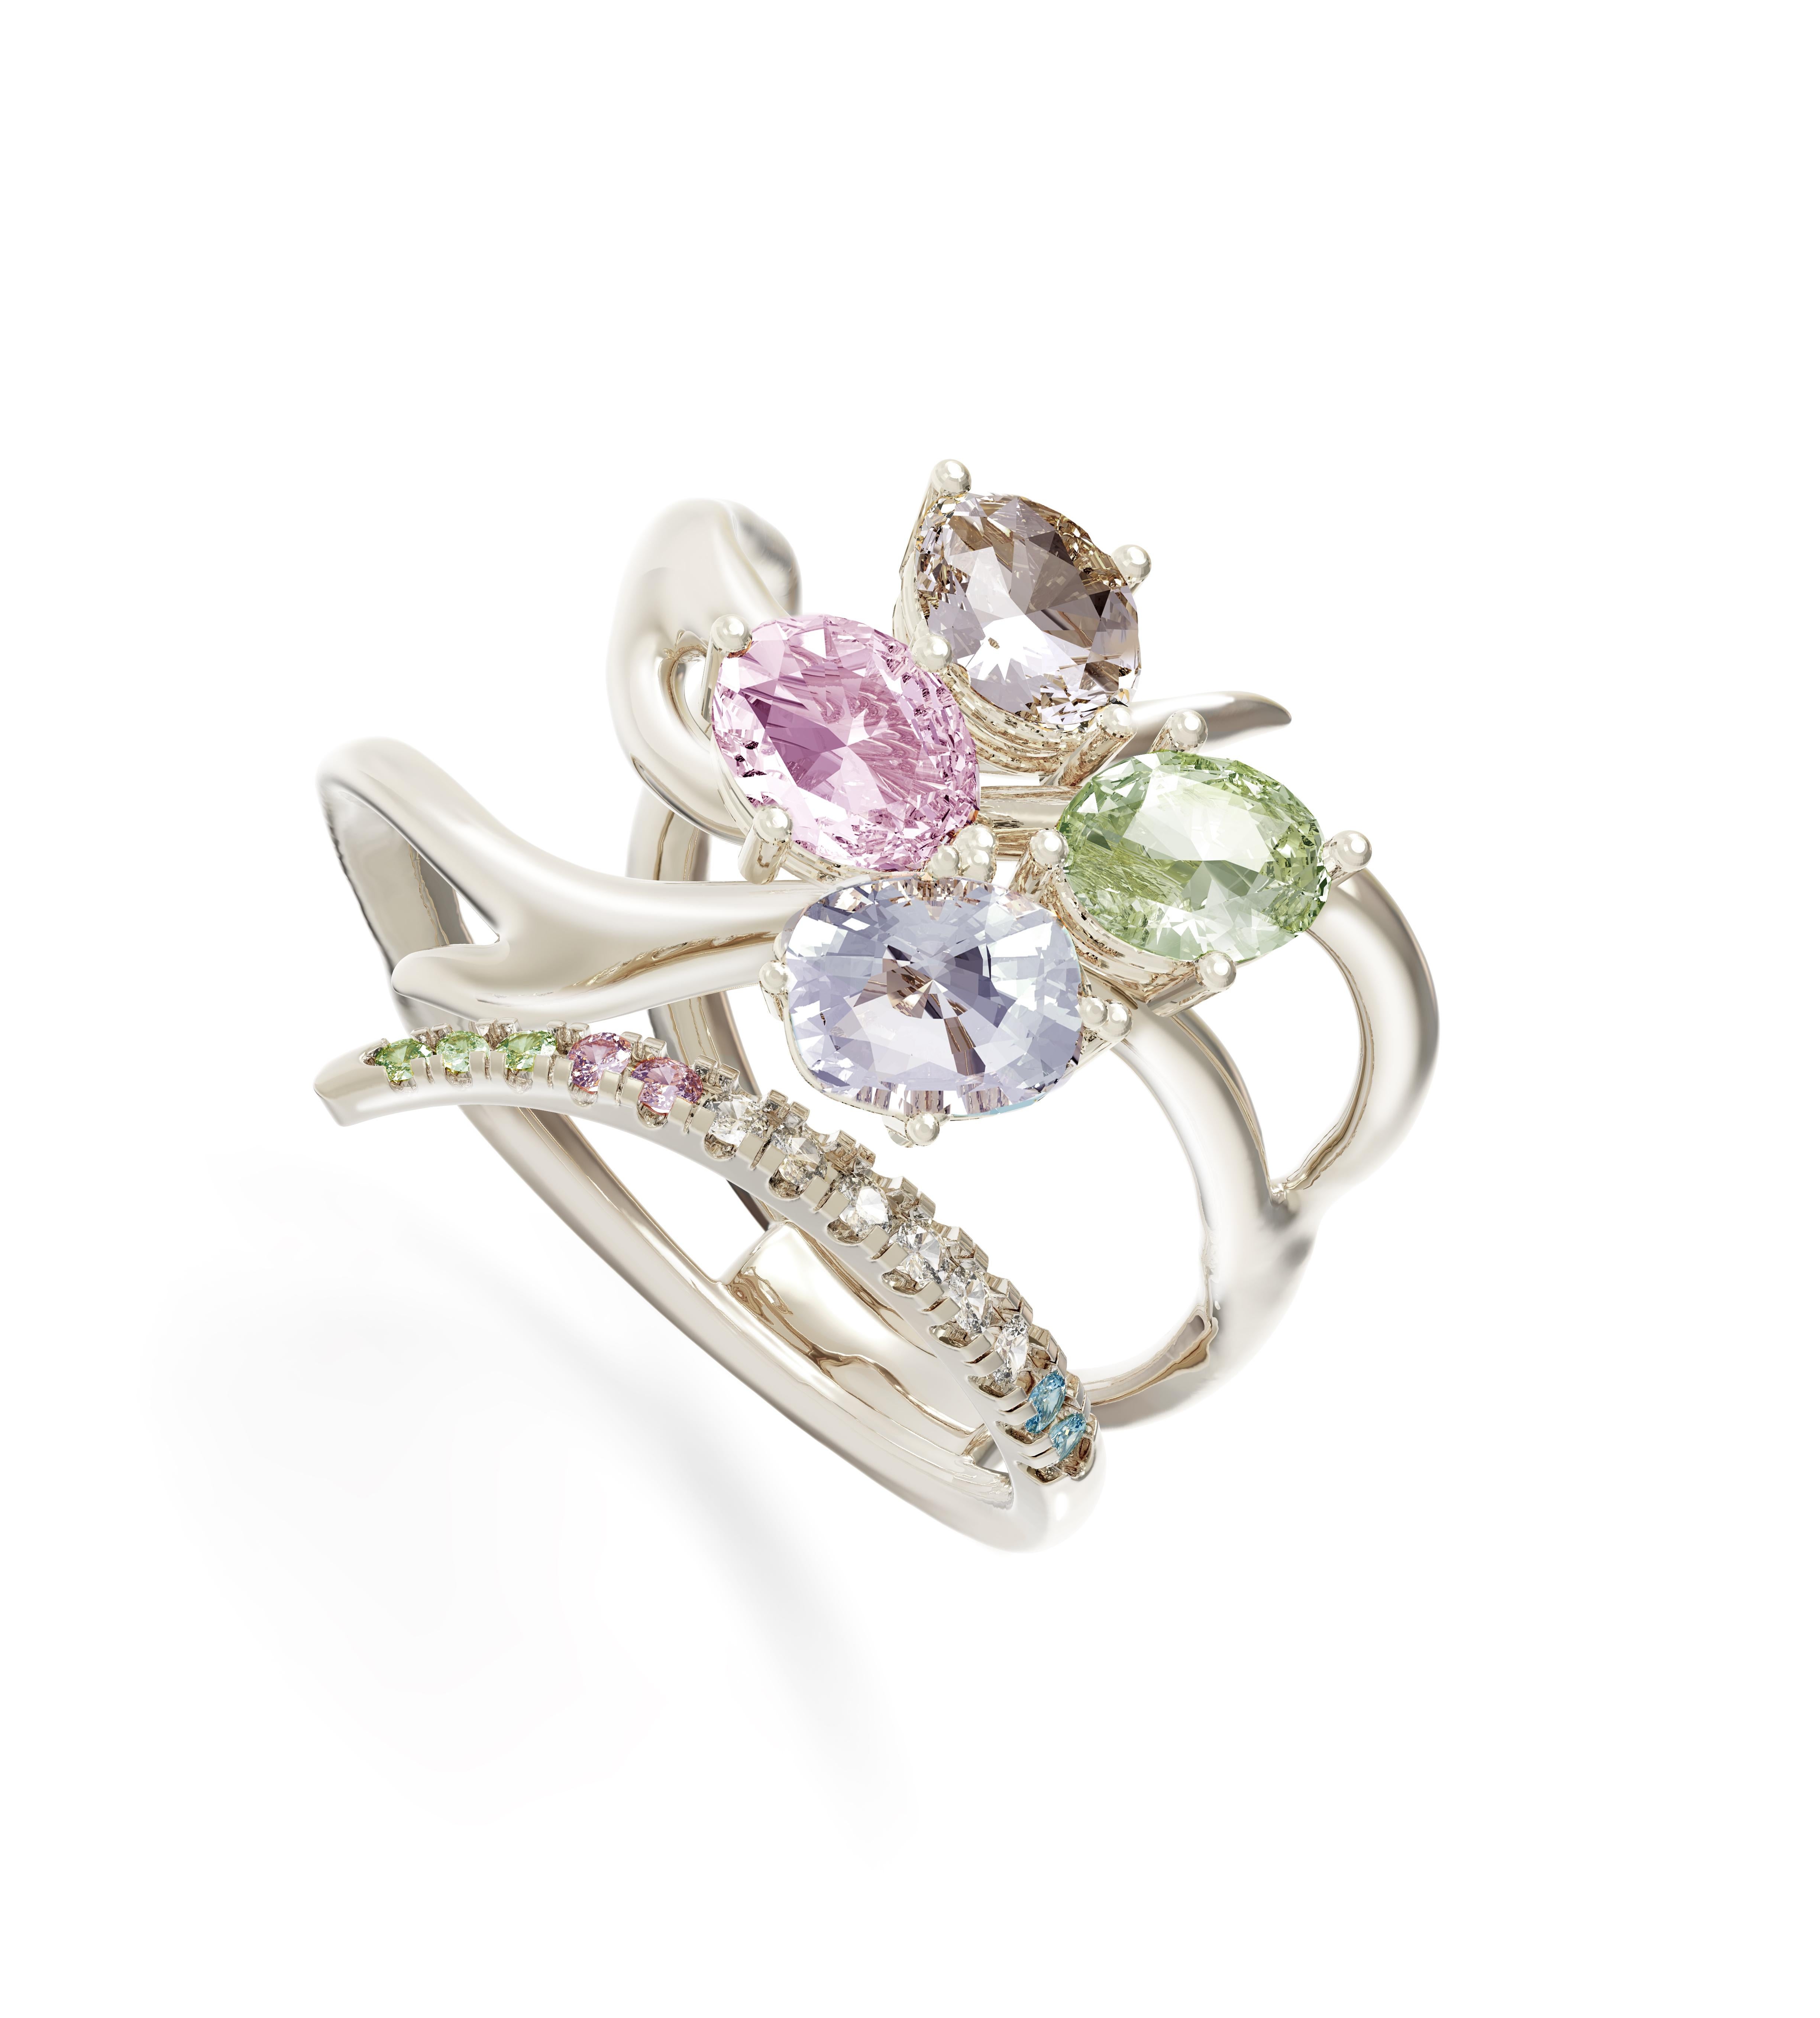 This Harajuku contemporary engagement ring is made of 18 karat white gold with natural gems on your choice custom made. This piece can be personally signed for the same price.
The matching gems are:
Oval cut pink sapphire, 1,7 carats;
Unheated